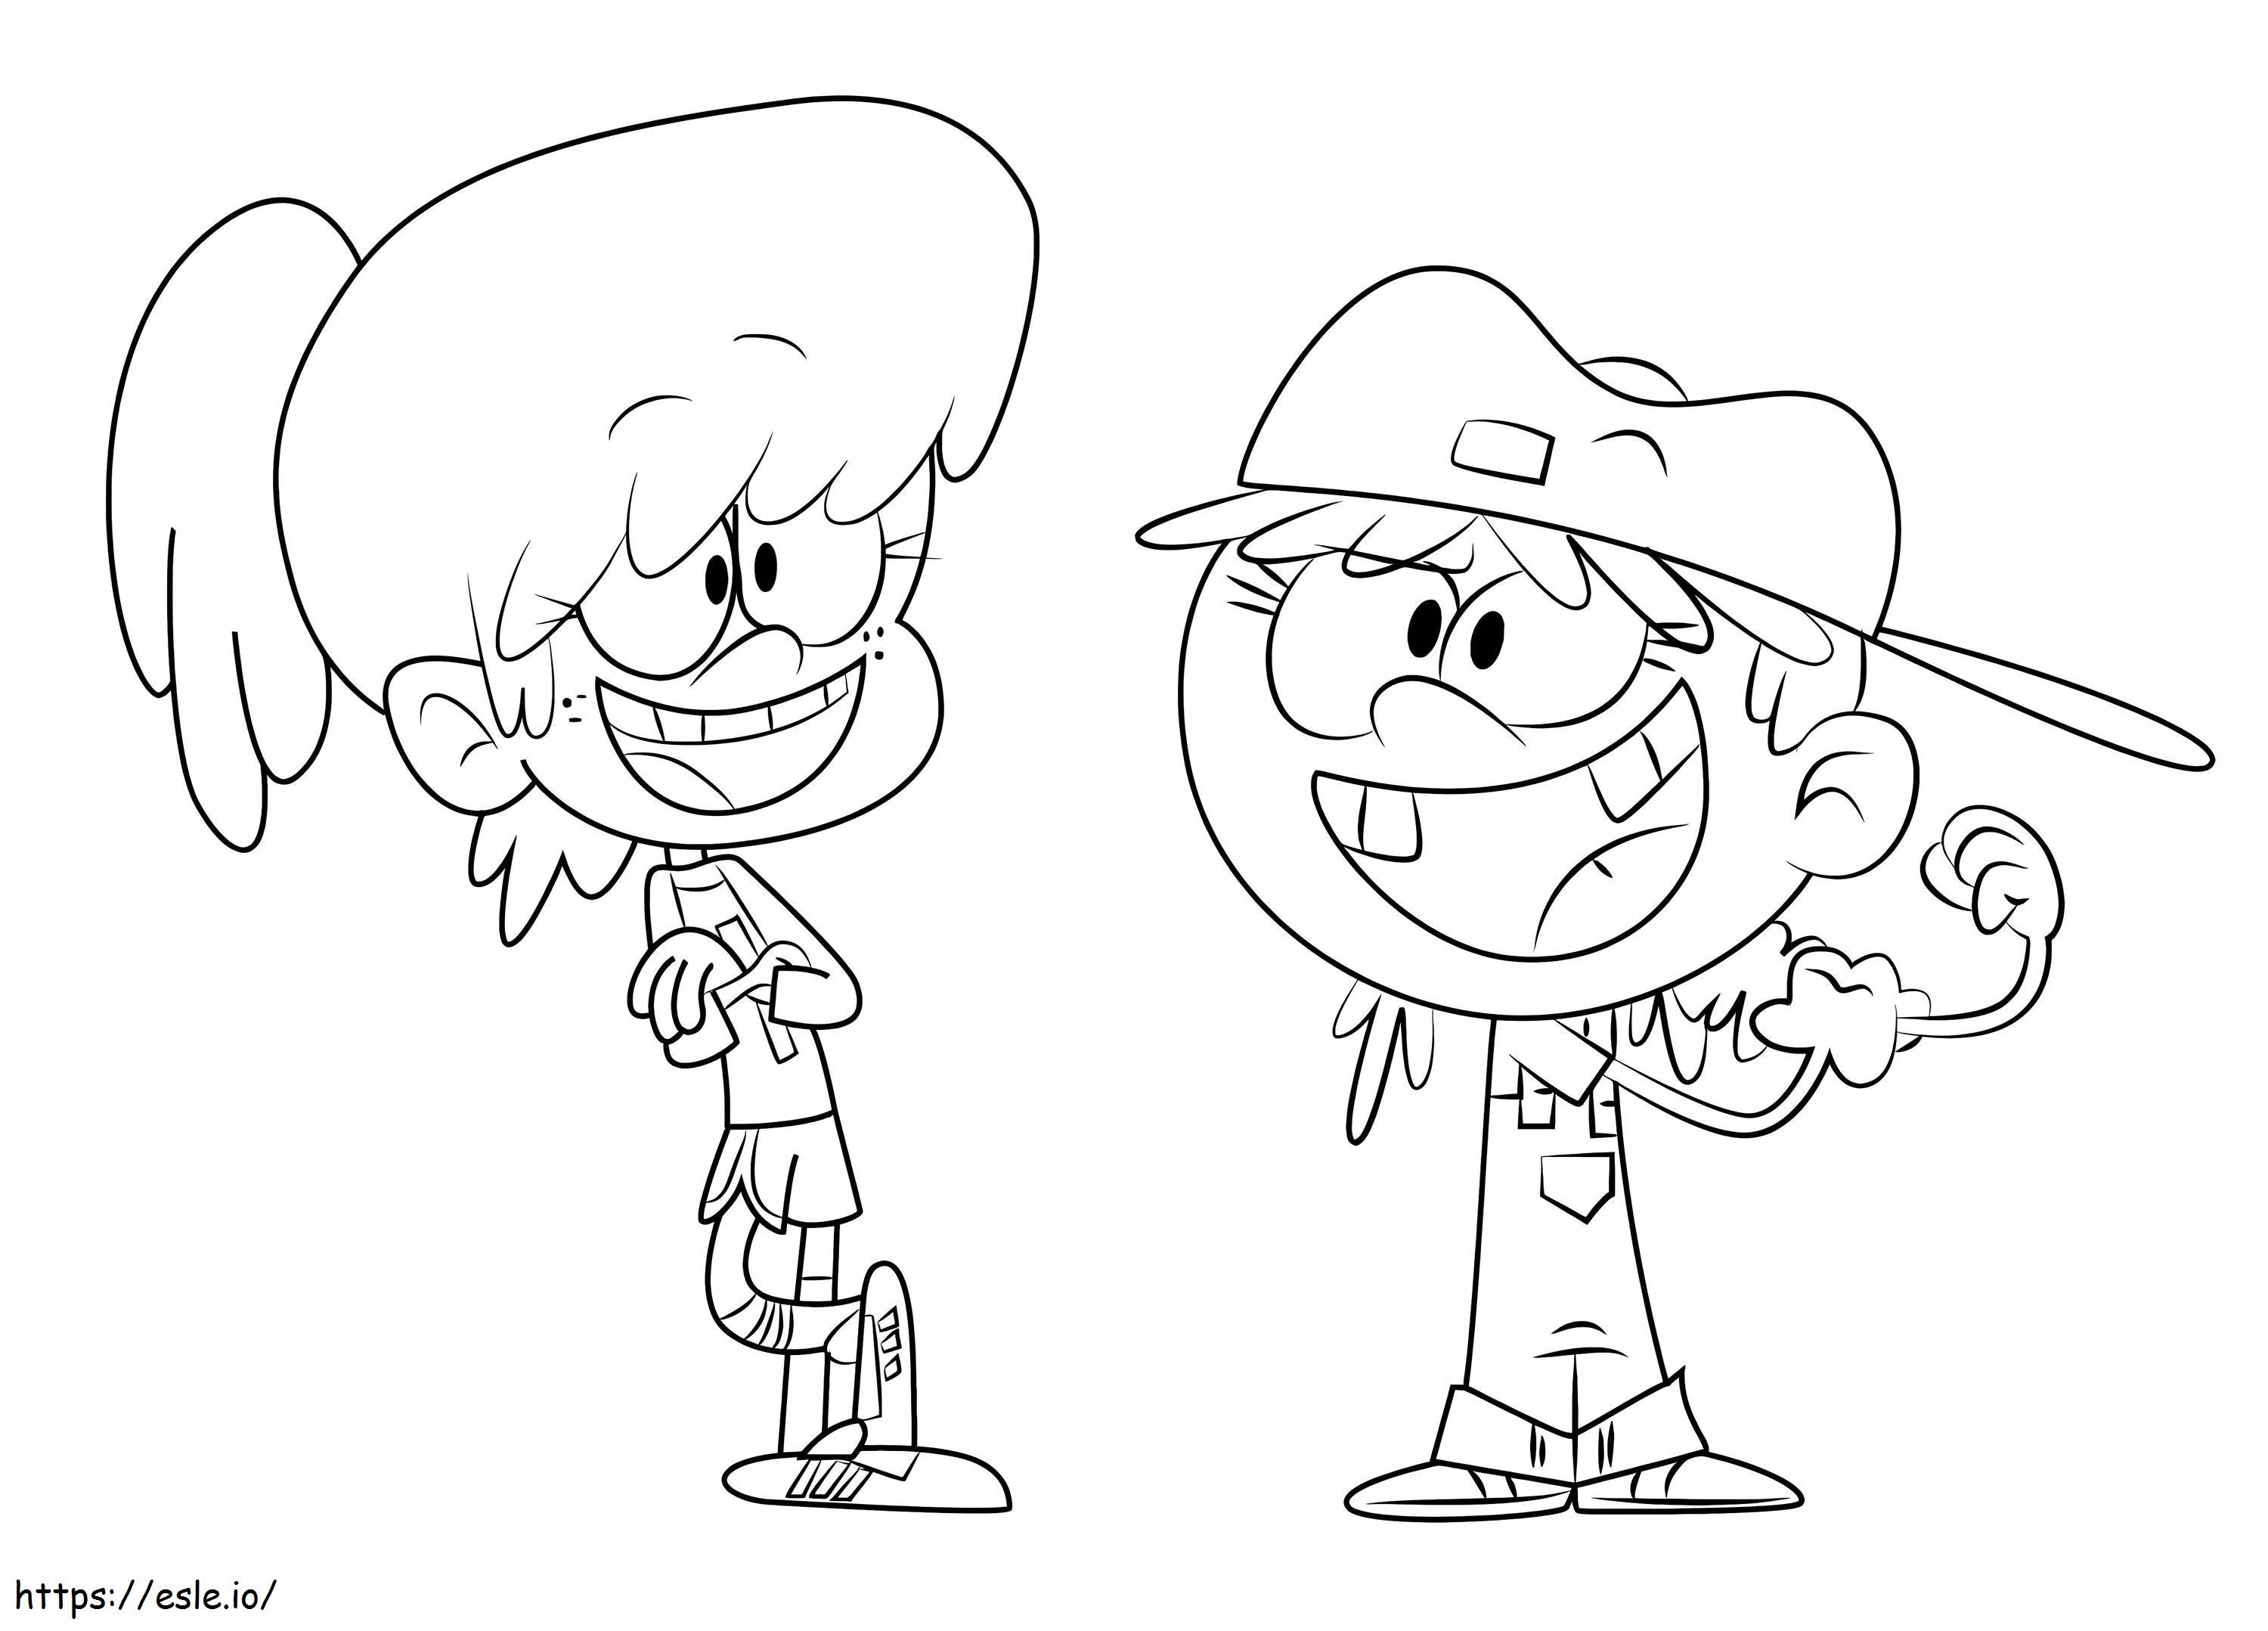 The Loud House 7 coloring page